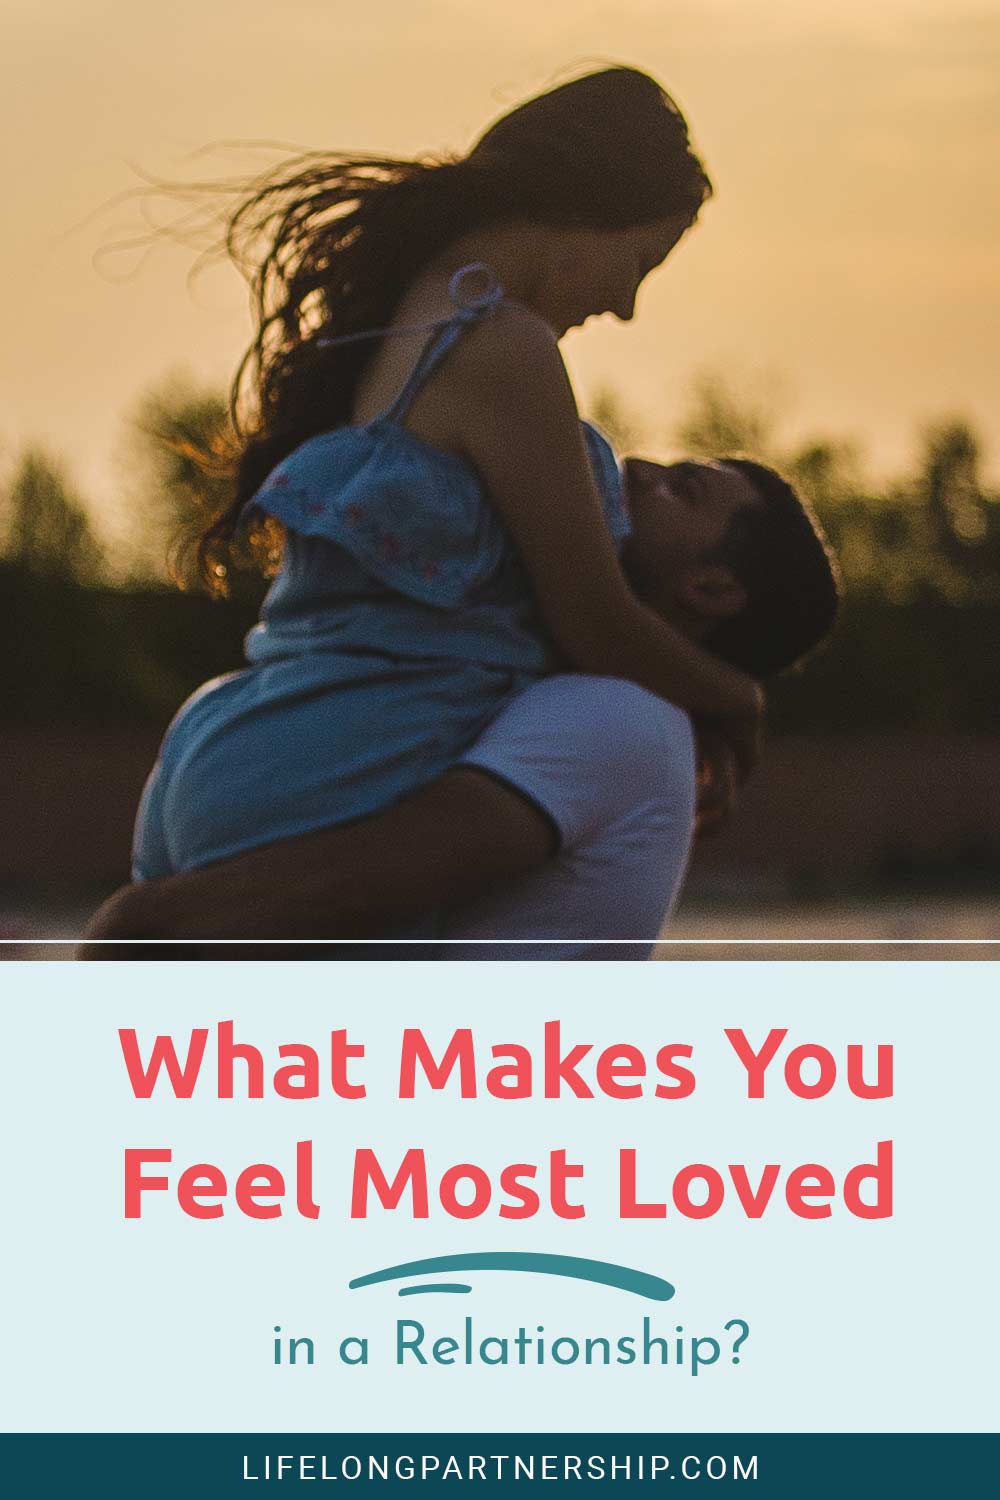 Man carrying a woman - What Makes You Feel Most Loved in a Relationship?